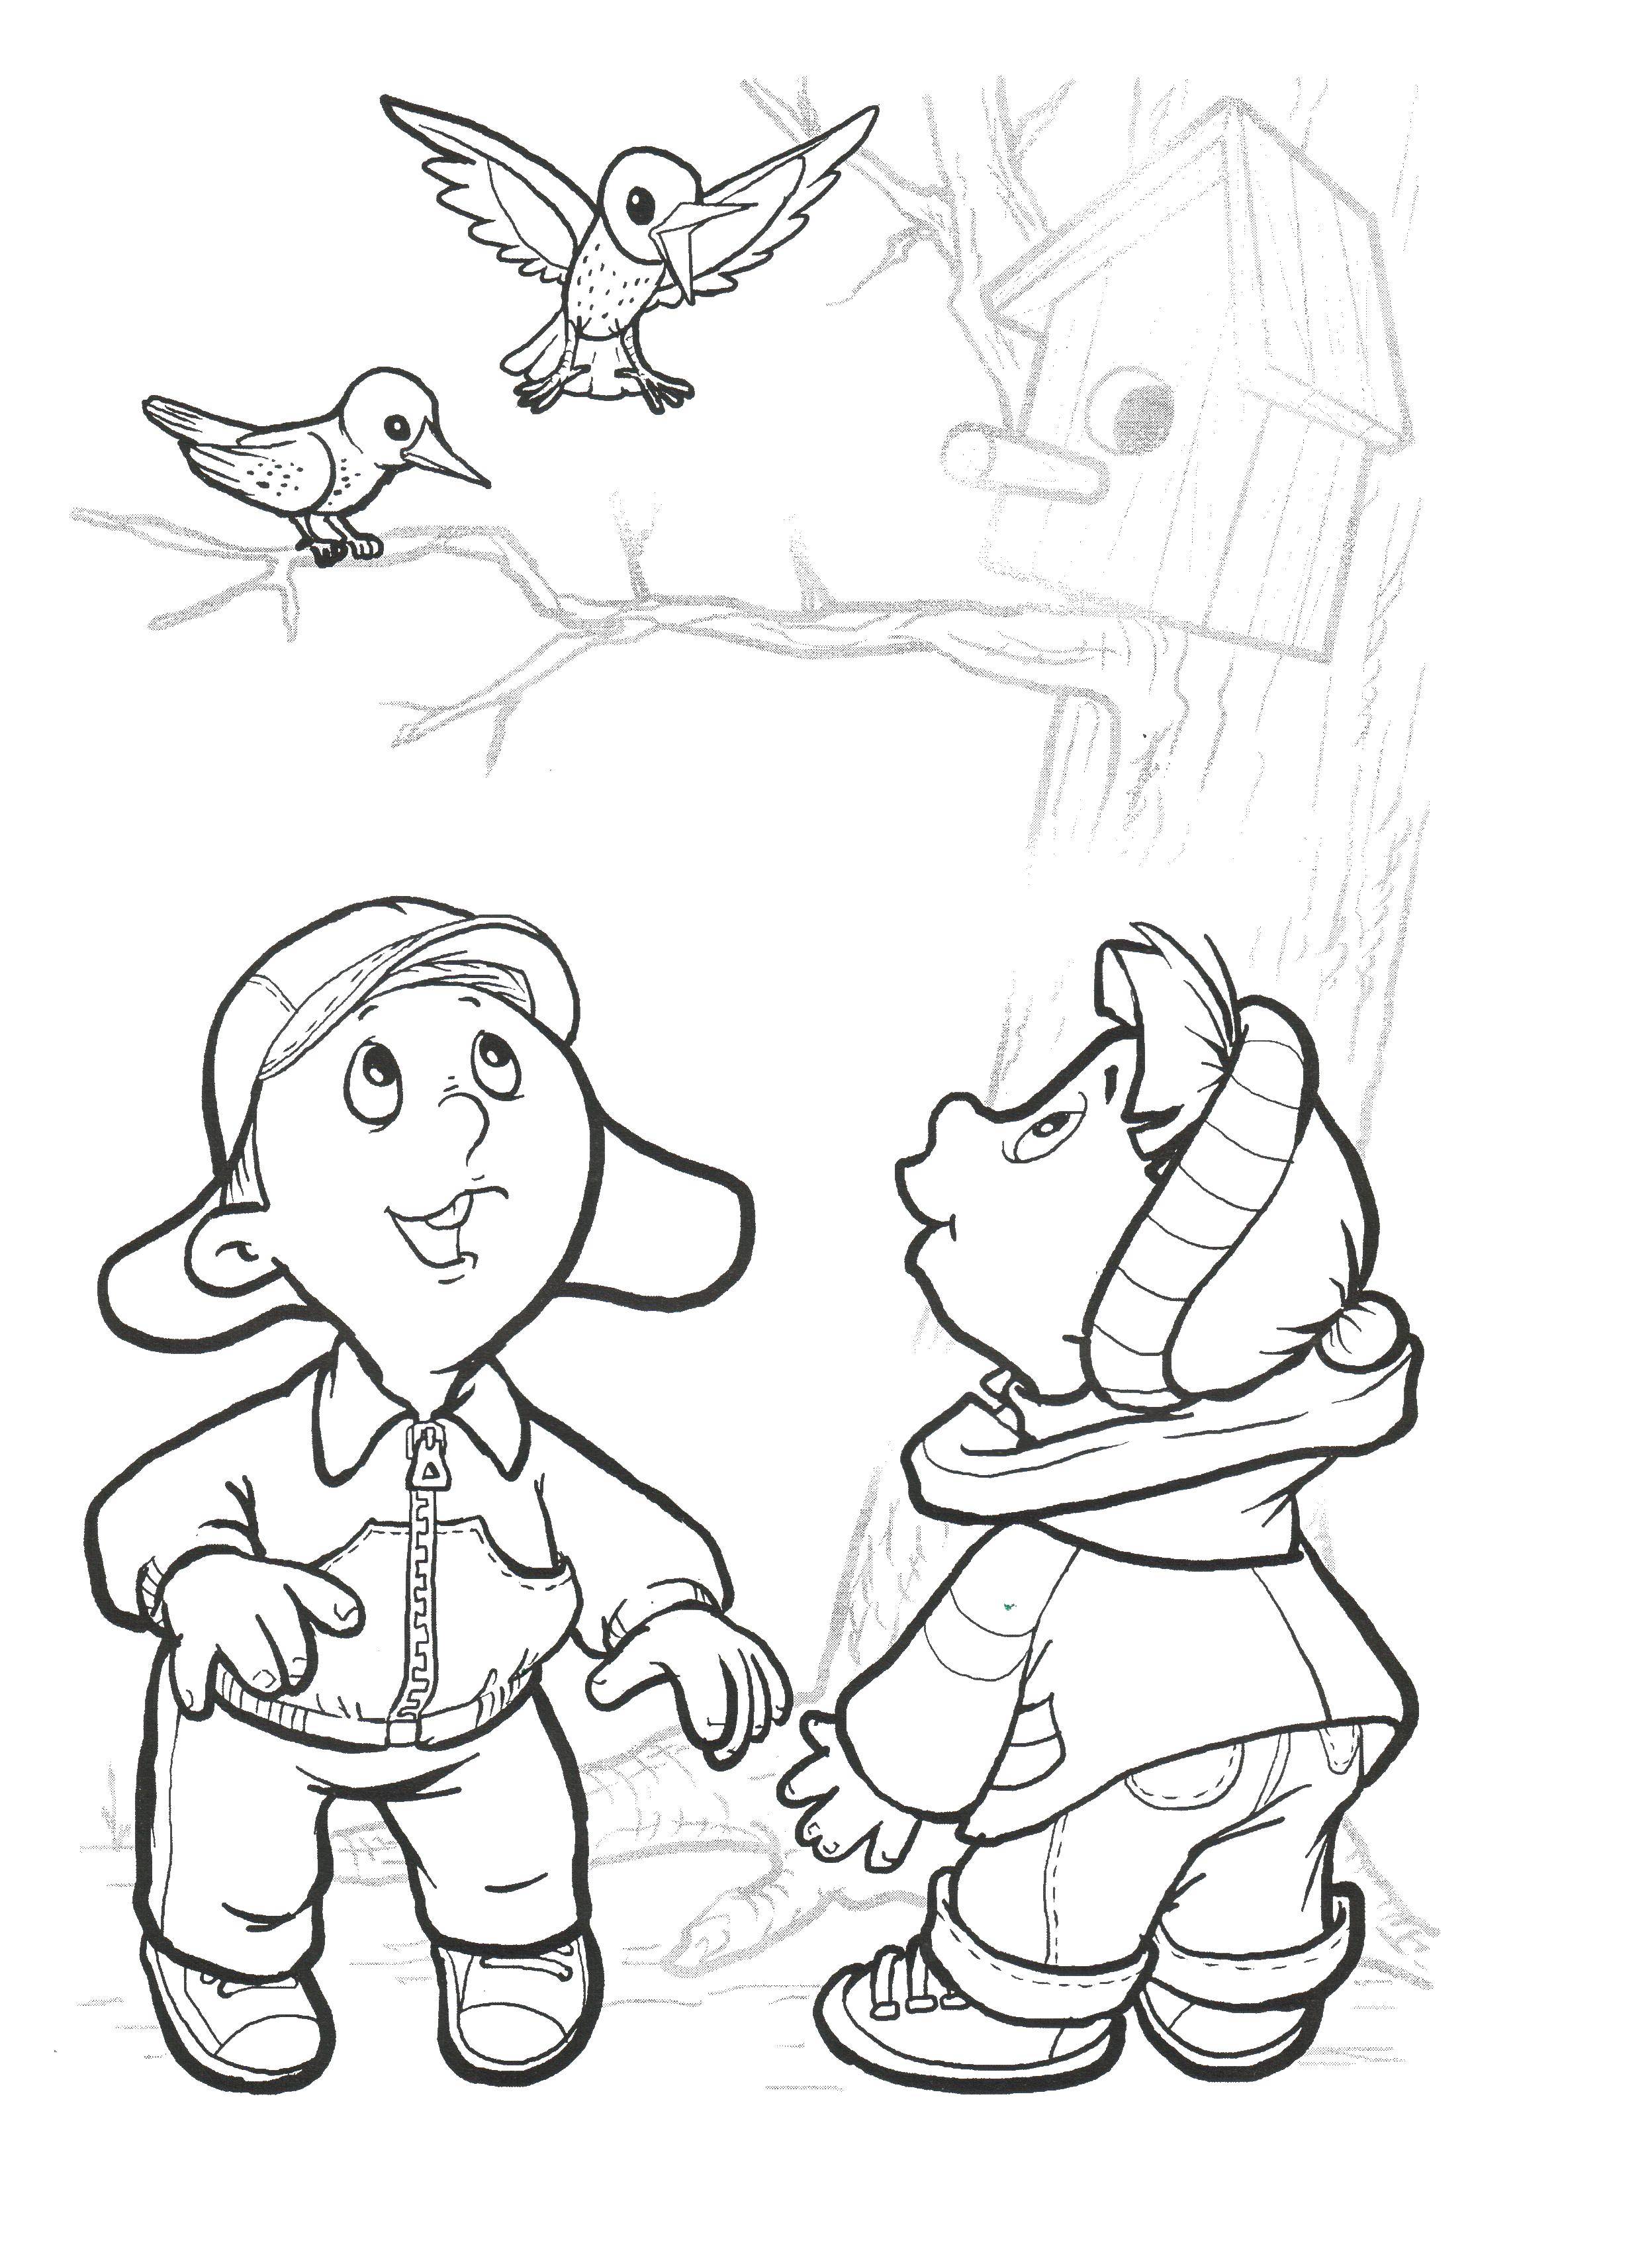 Coloring Kids and starlings. Category spring. Tags:  children, starlings, birdhouse.